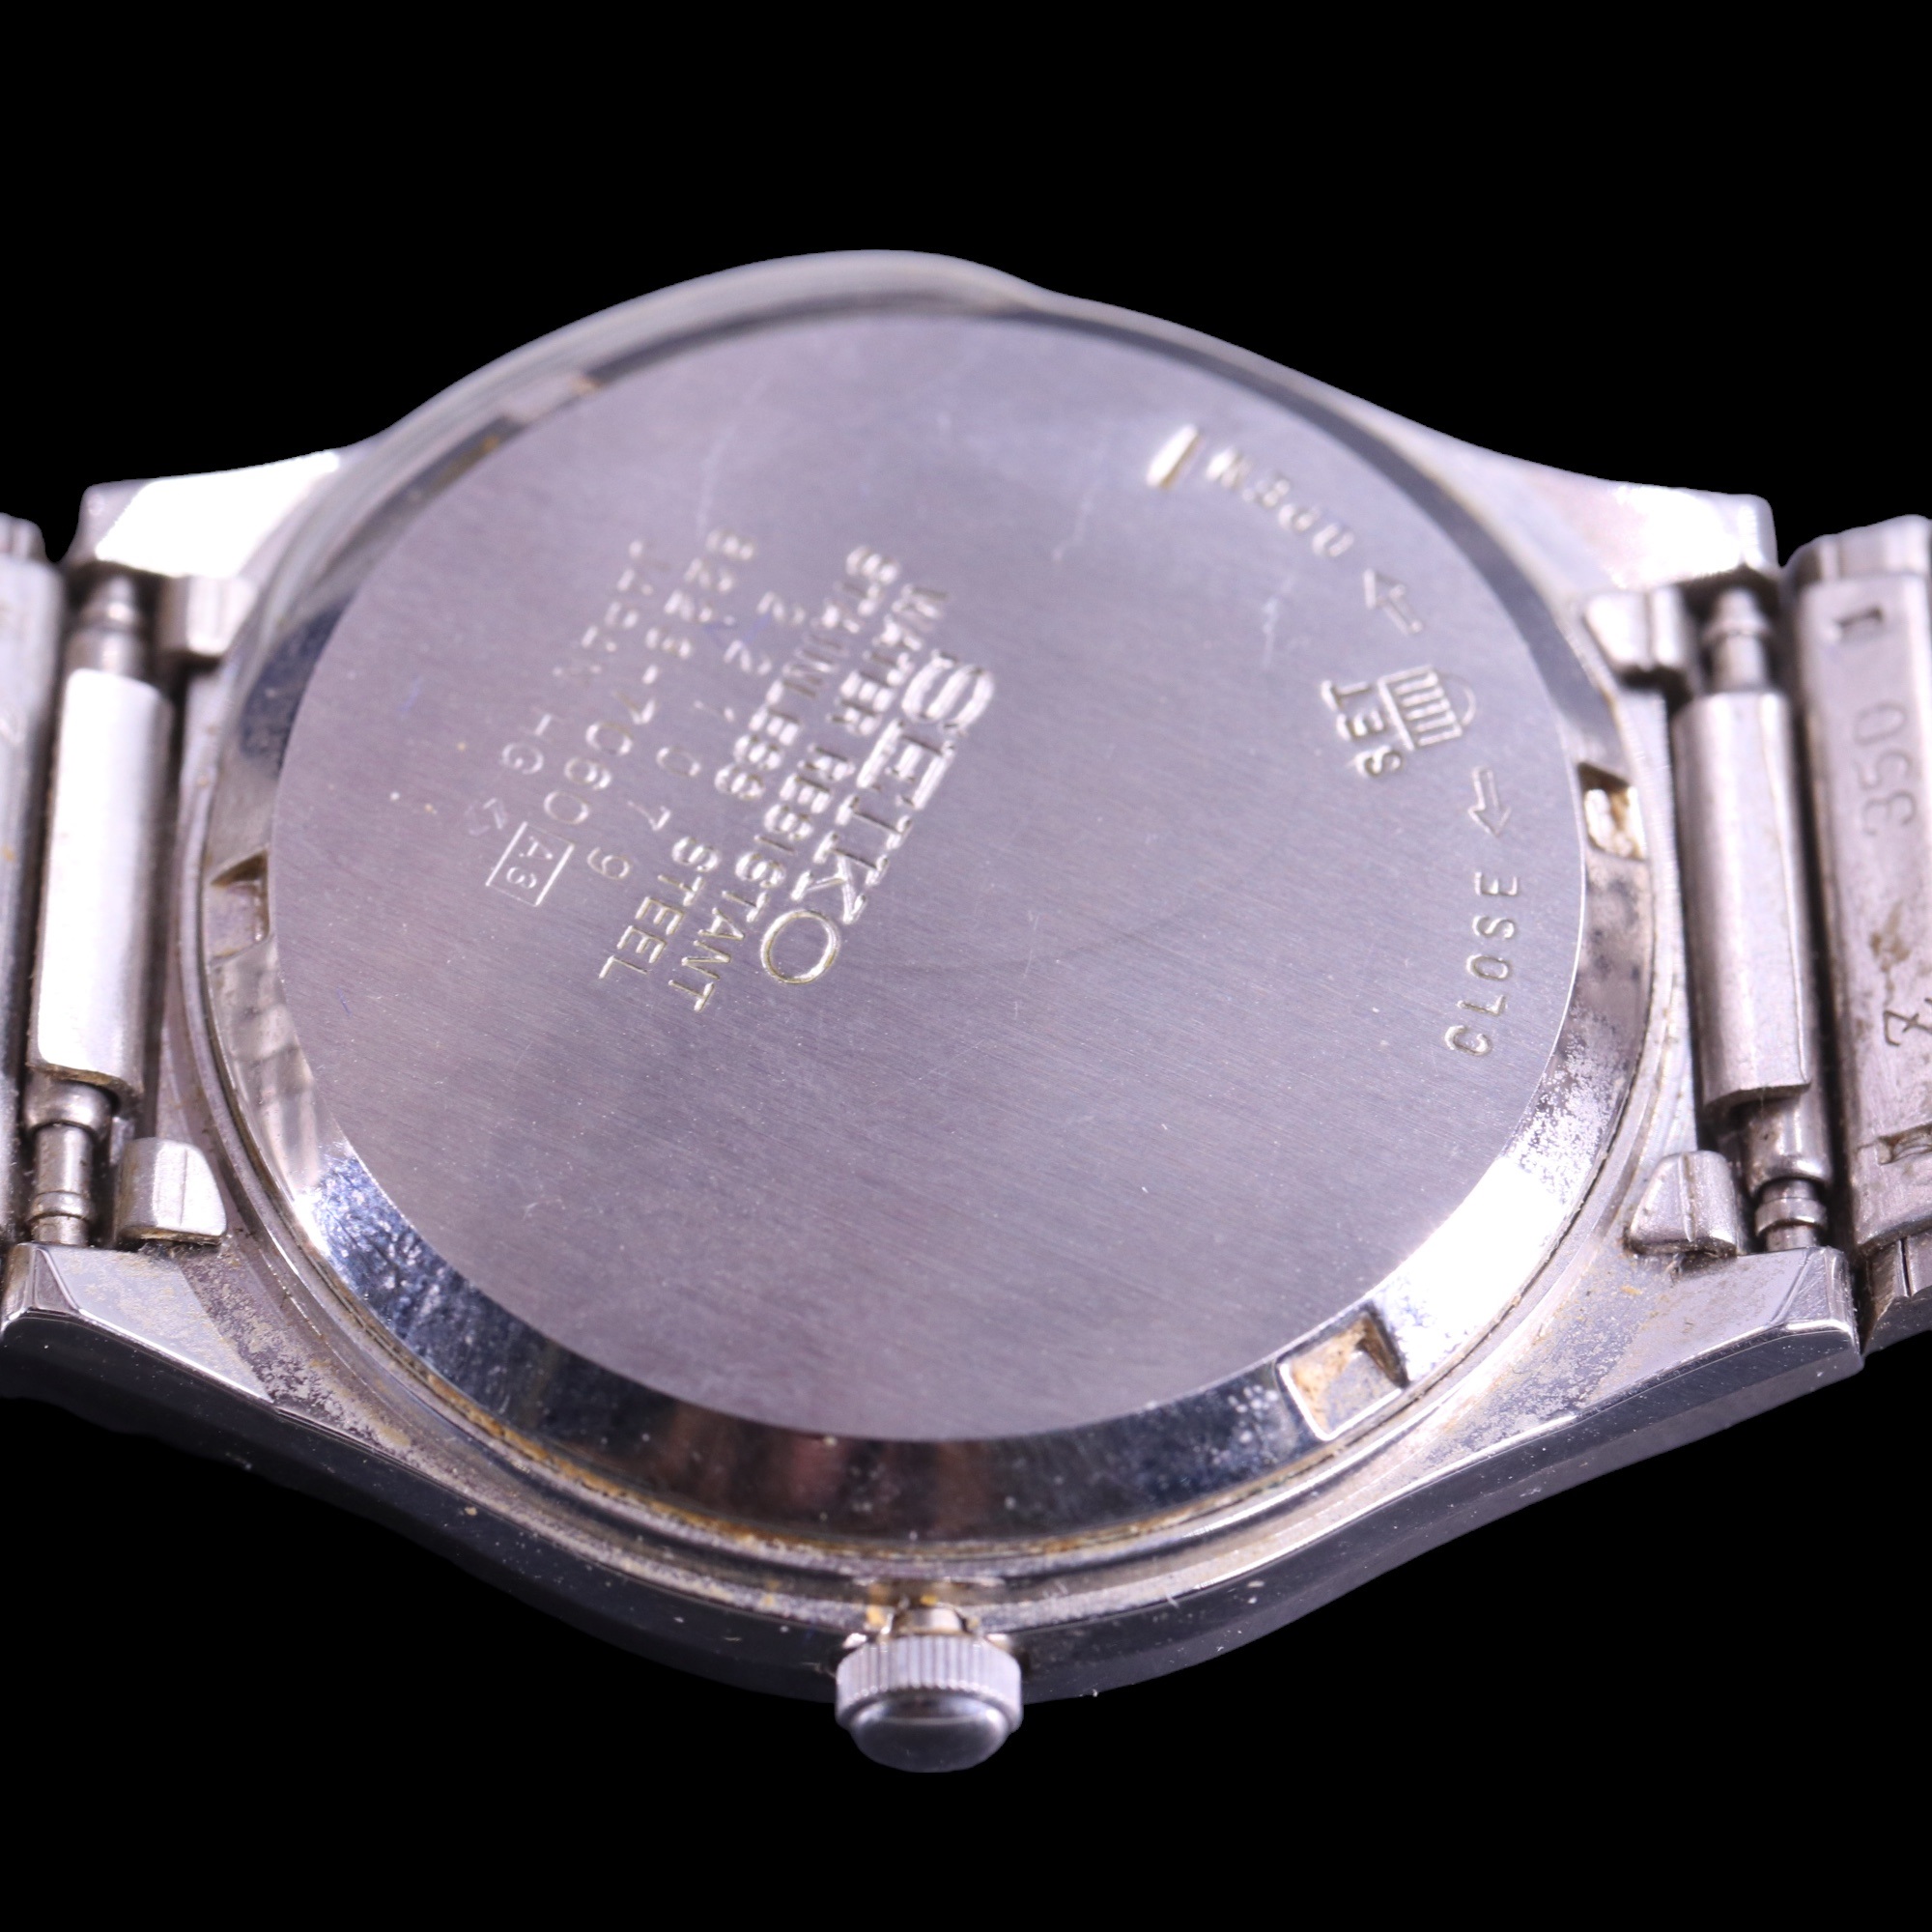 A vintage Seiko SQ stainless steel wristwatch, having a calibre 8223 quartz movement, charcoal face, - Image 4 of 6